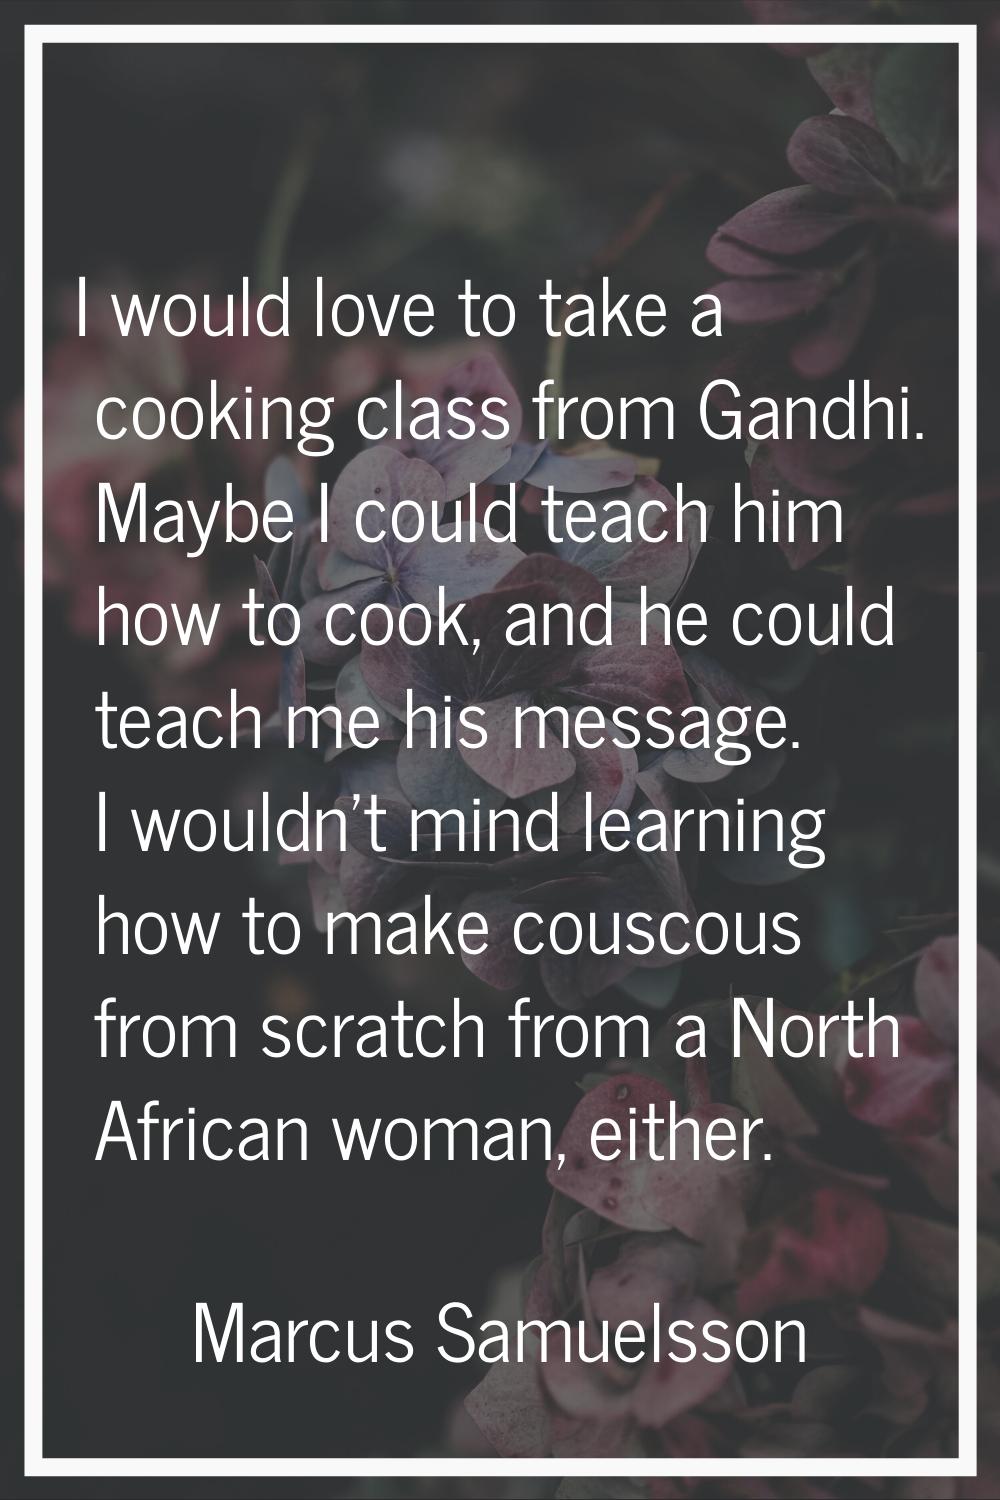 I would love to take a cooking class from Gandhi. Maybe I could teach him how to cook, and he could